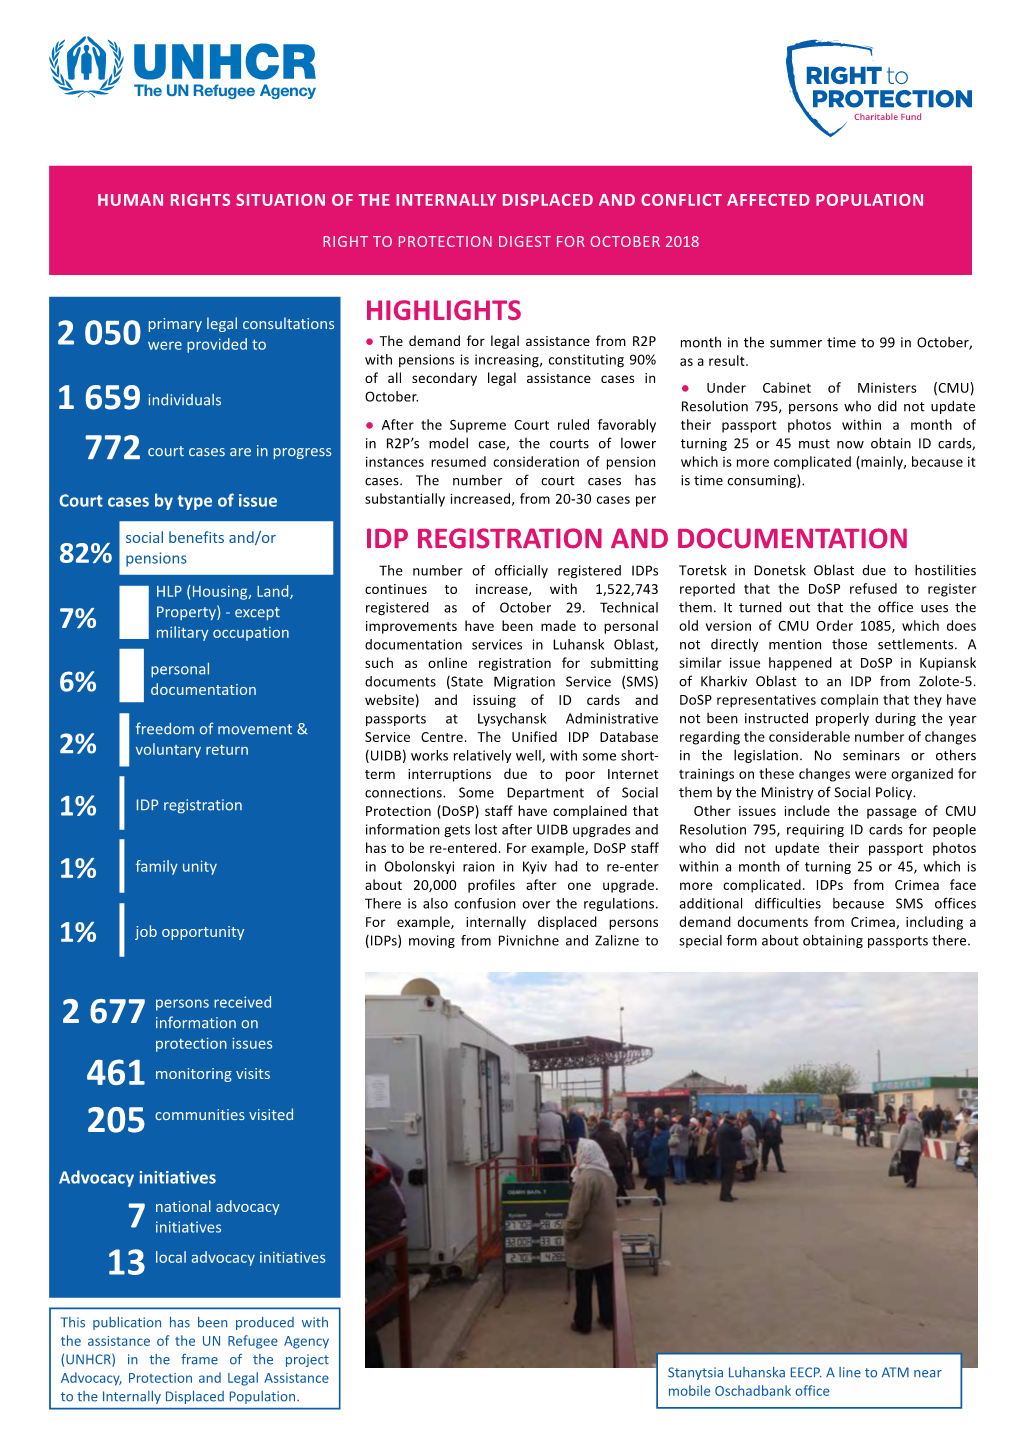 Digest on Idps and Conflict Affected Persons for October